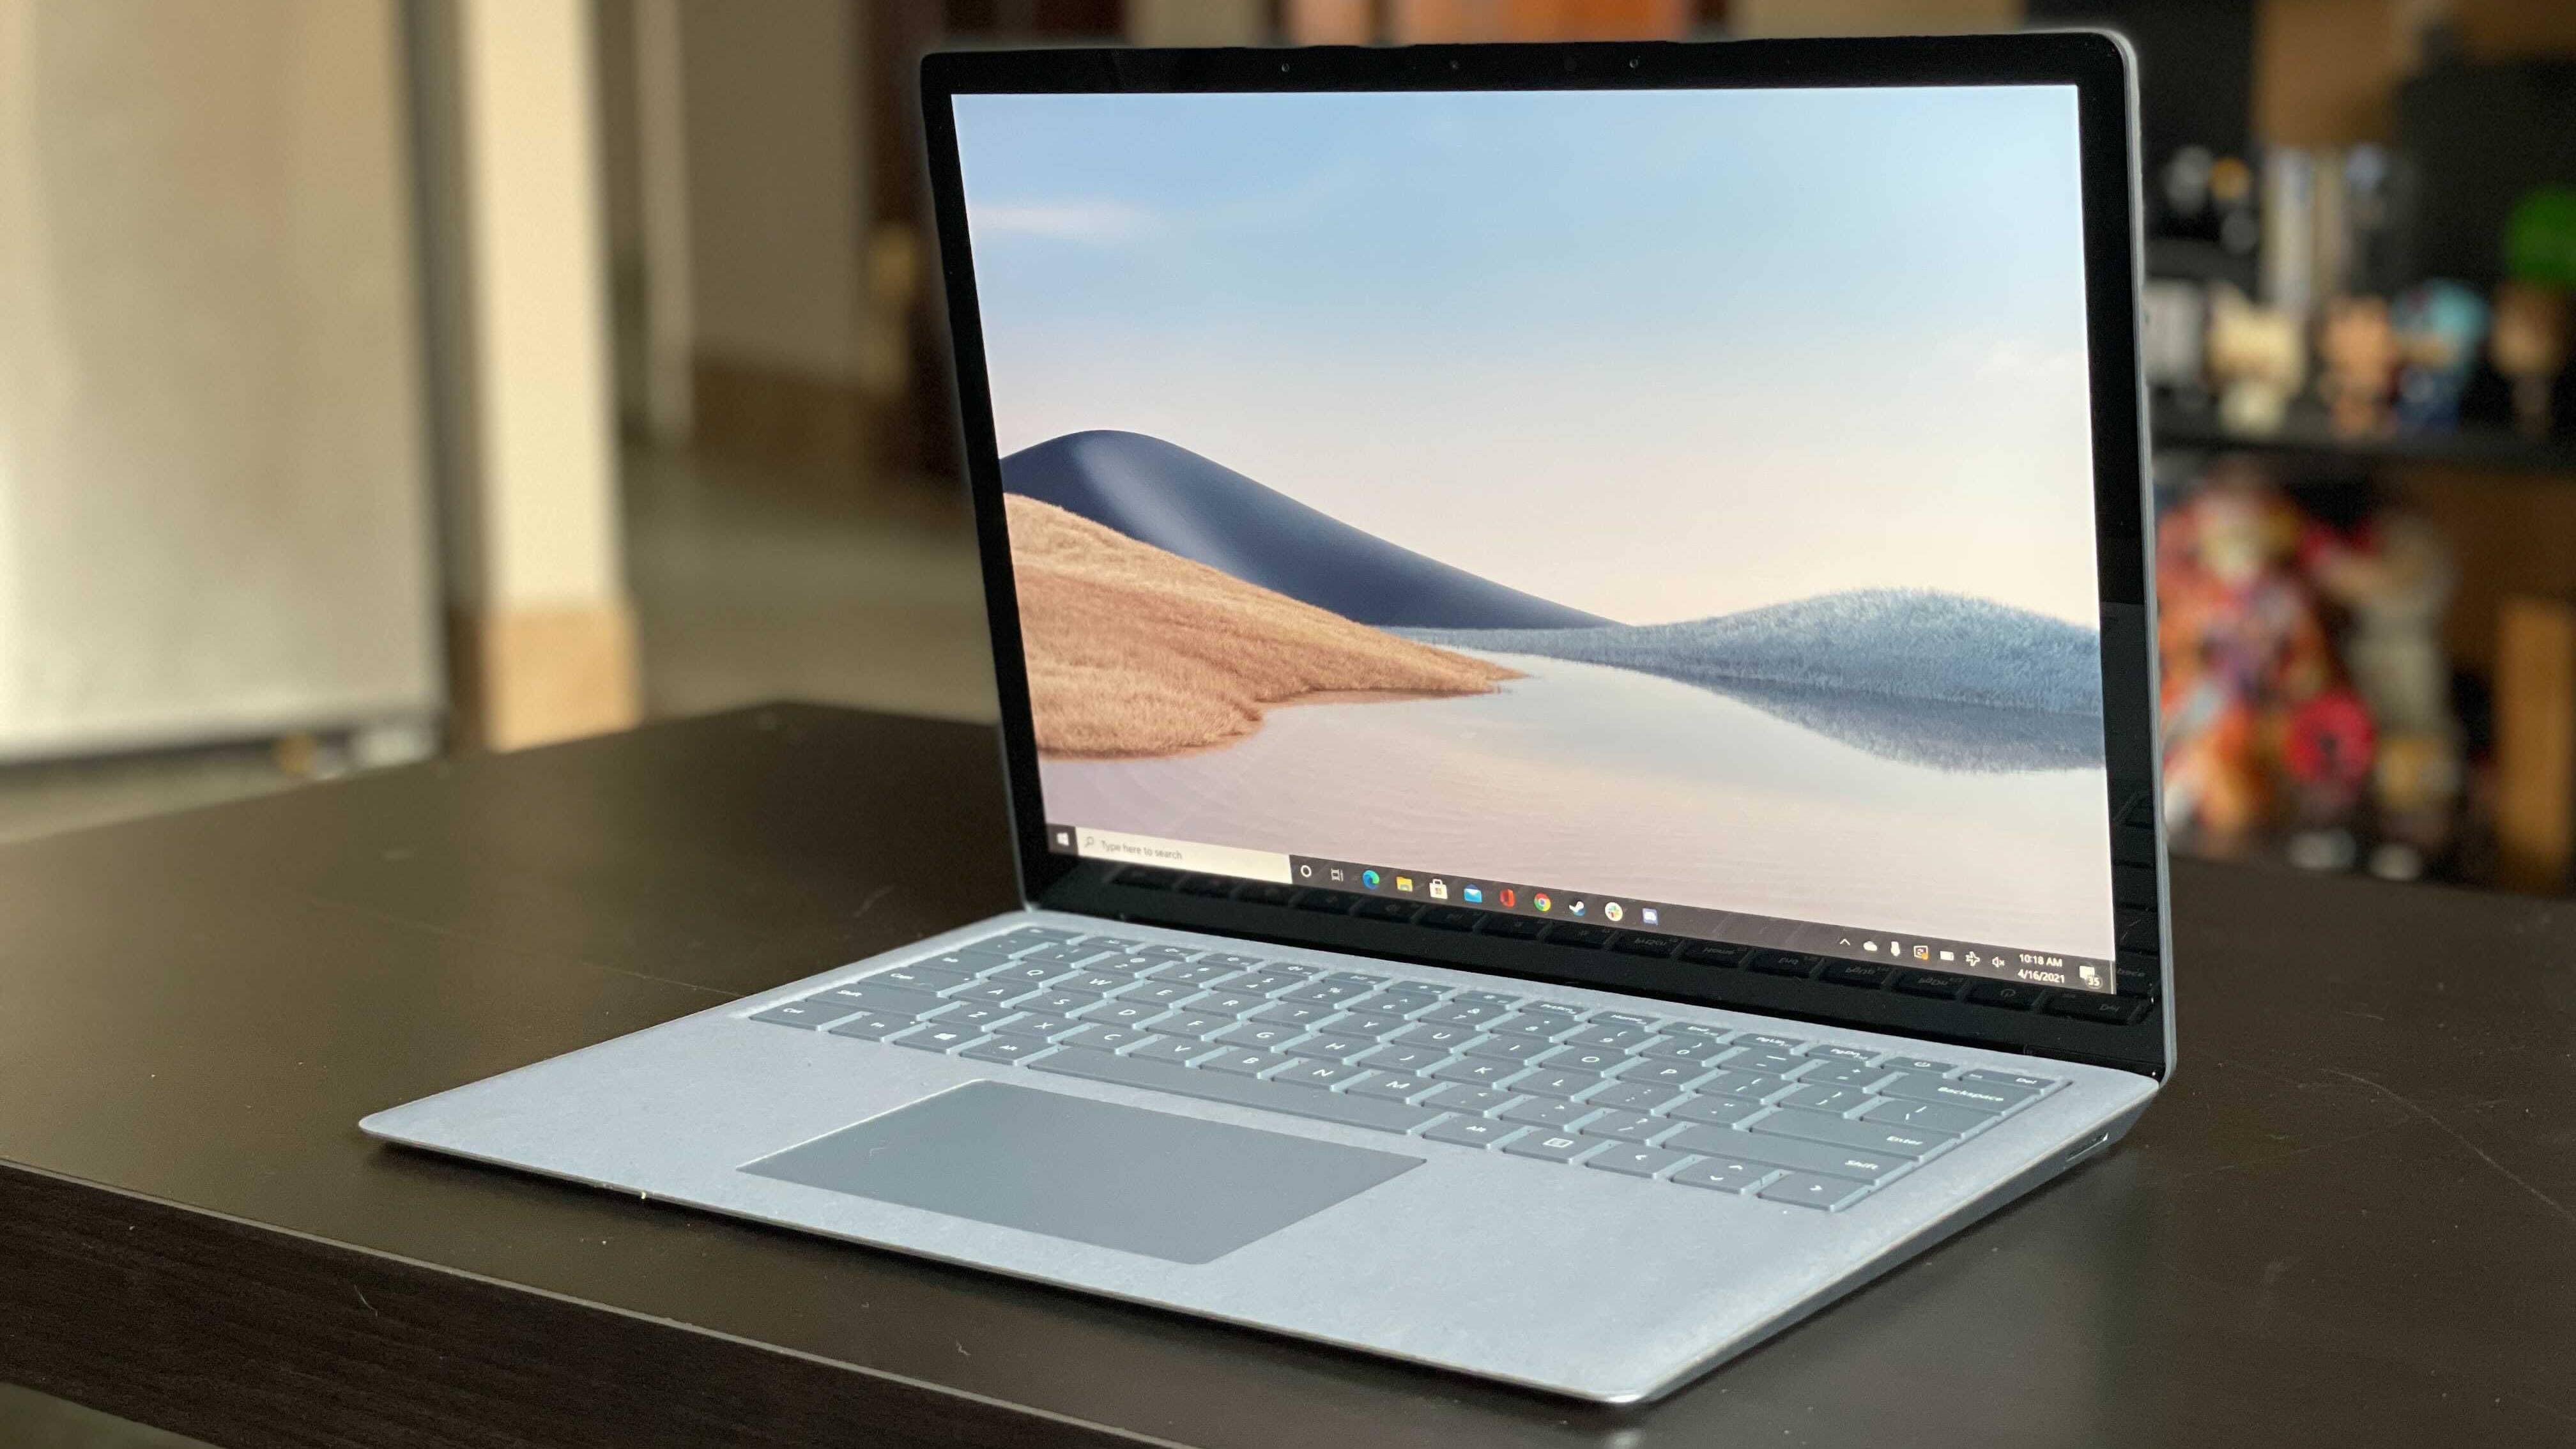 Microsoft Surface Laptop 3 (13.5-Inch) Review